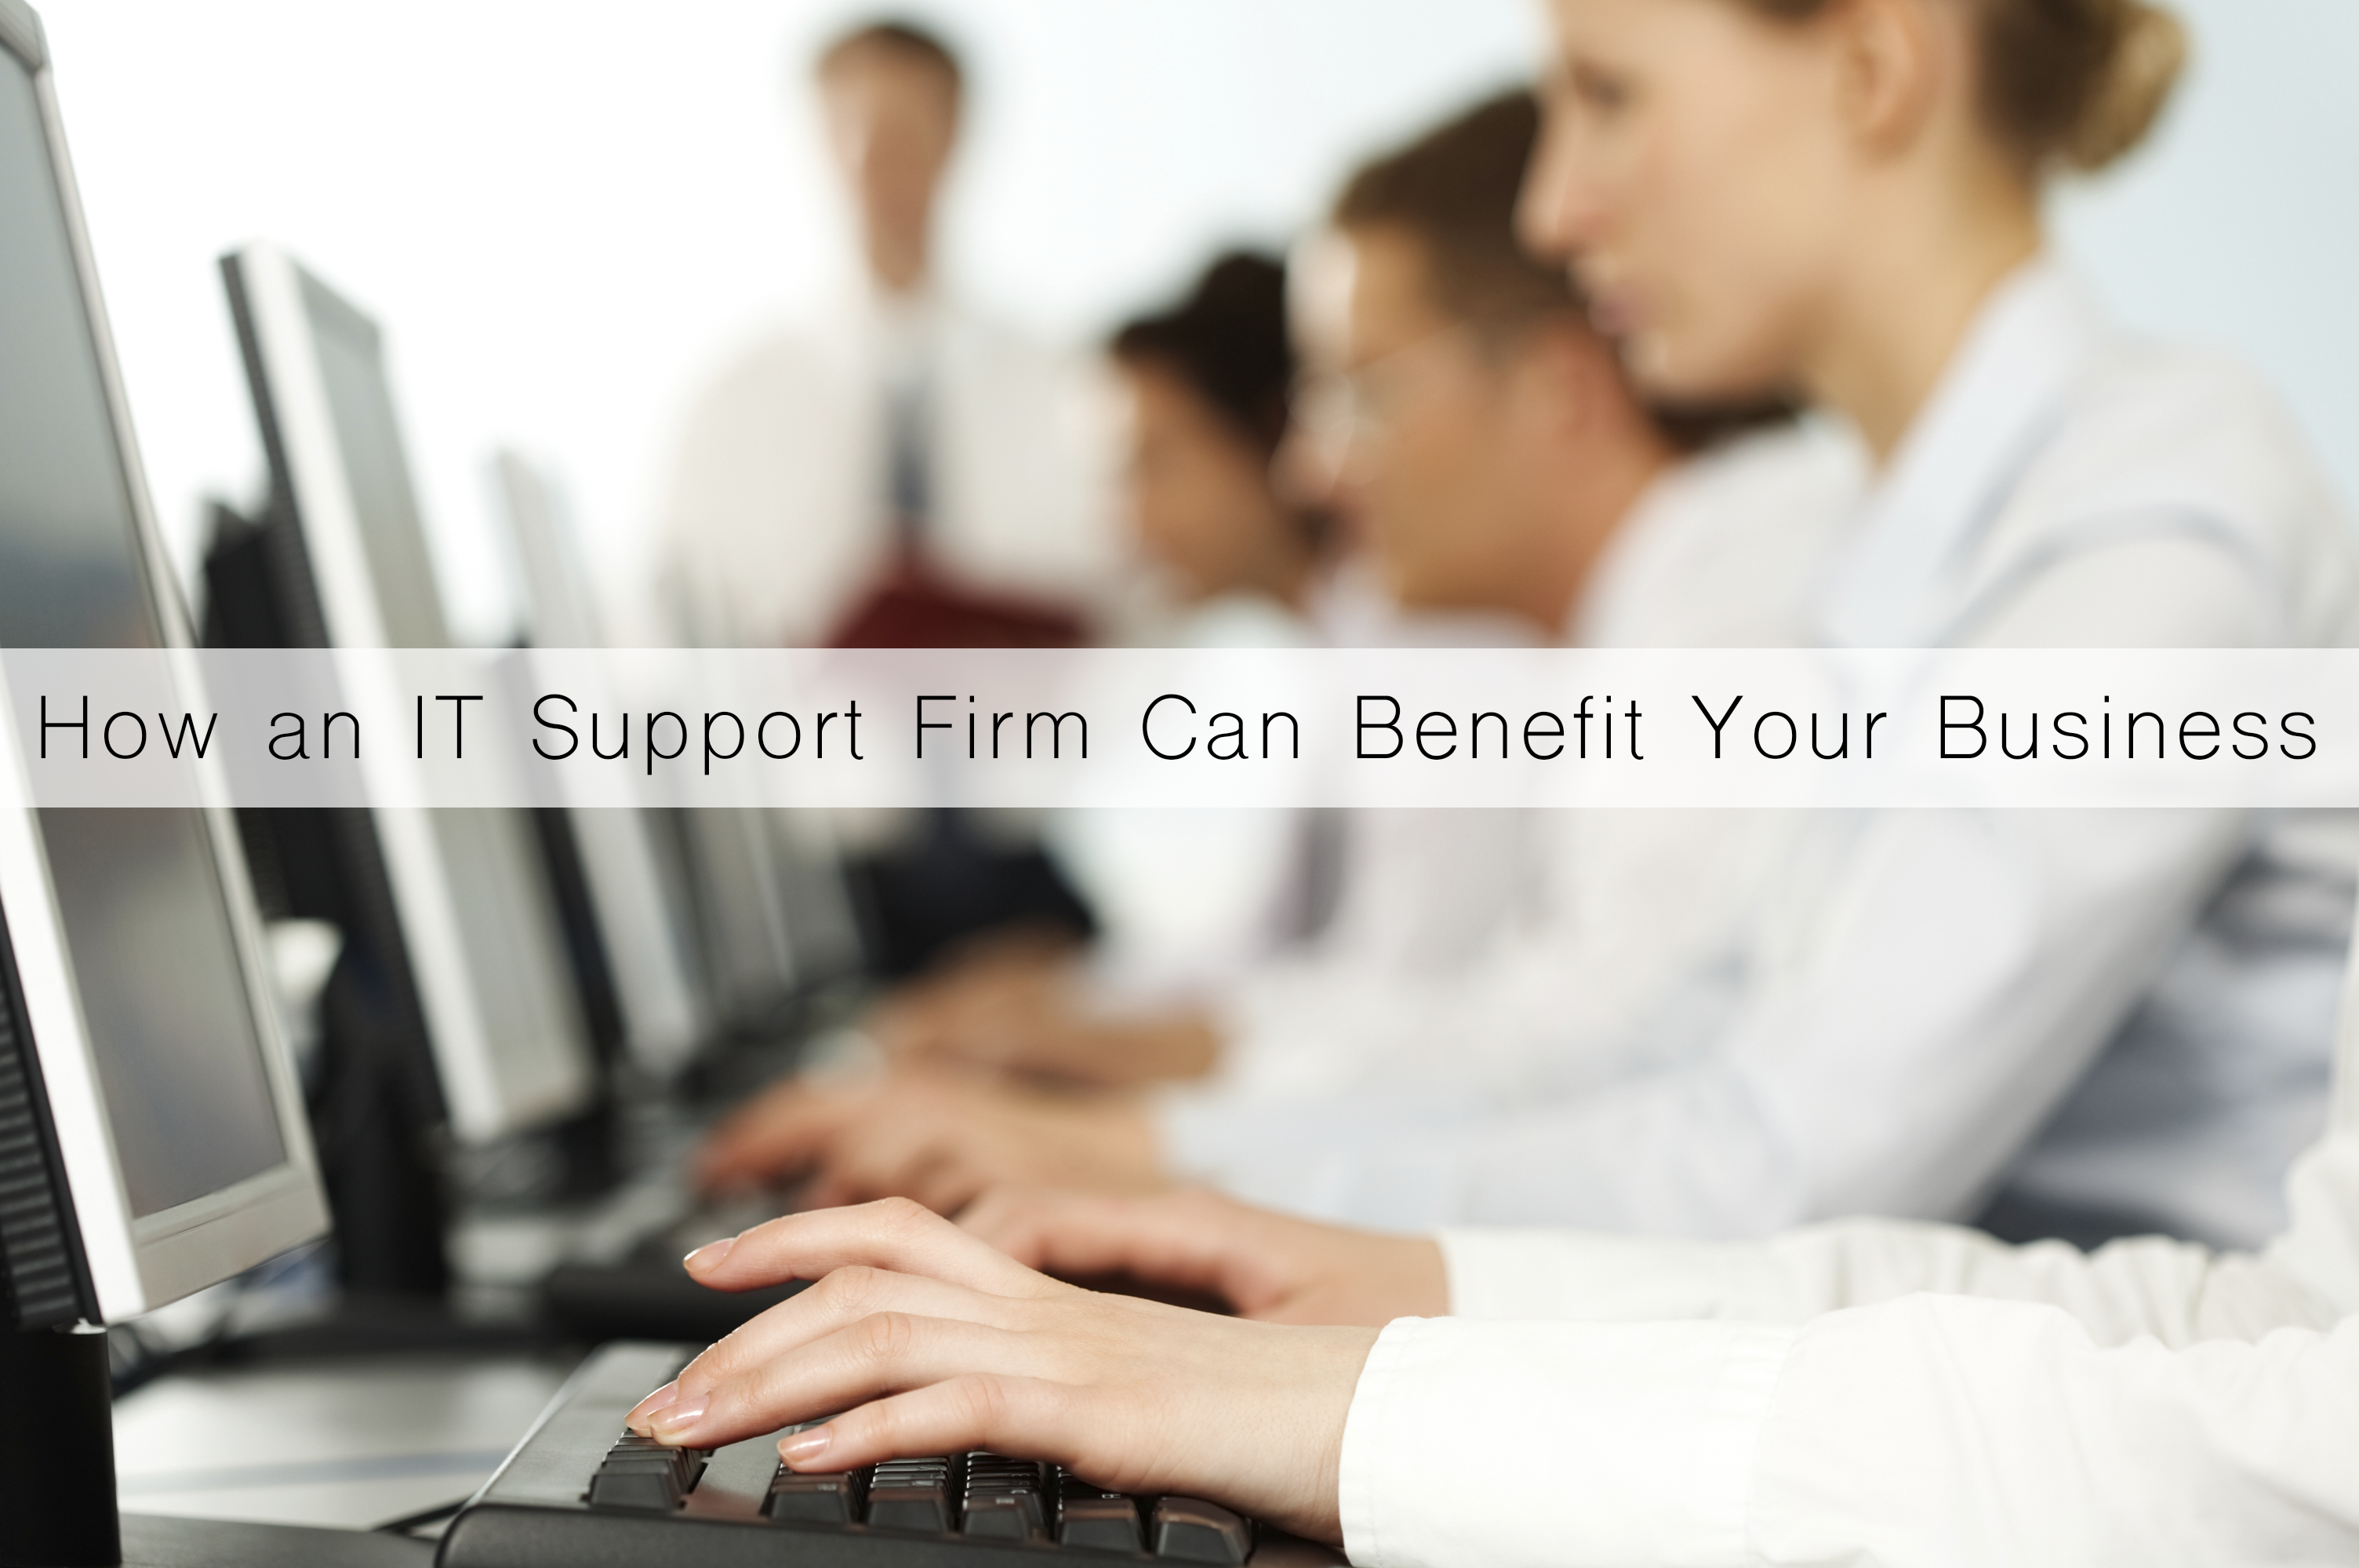 How an IT Support Firm Can Benefit Your Business